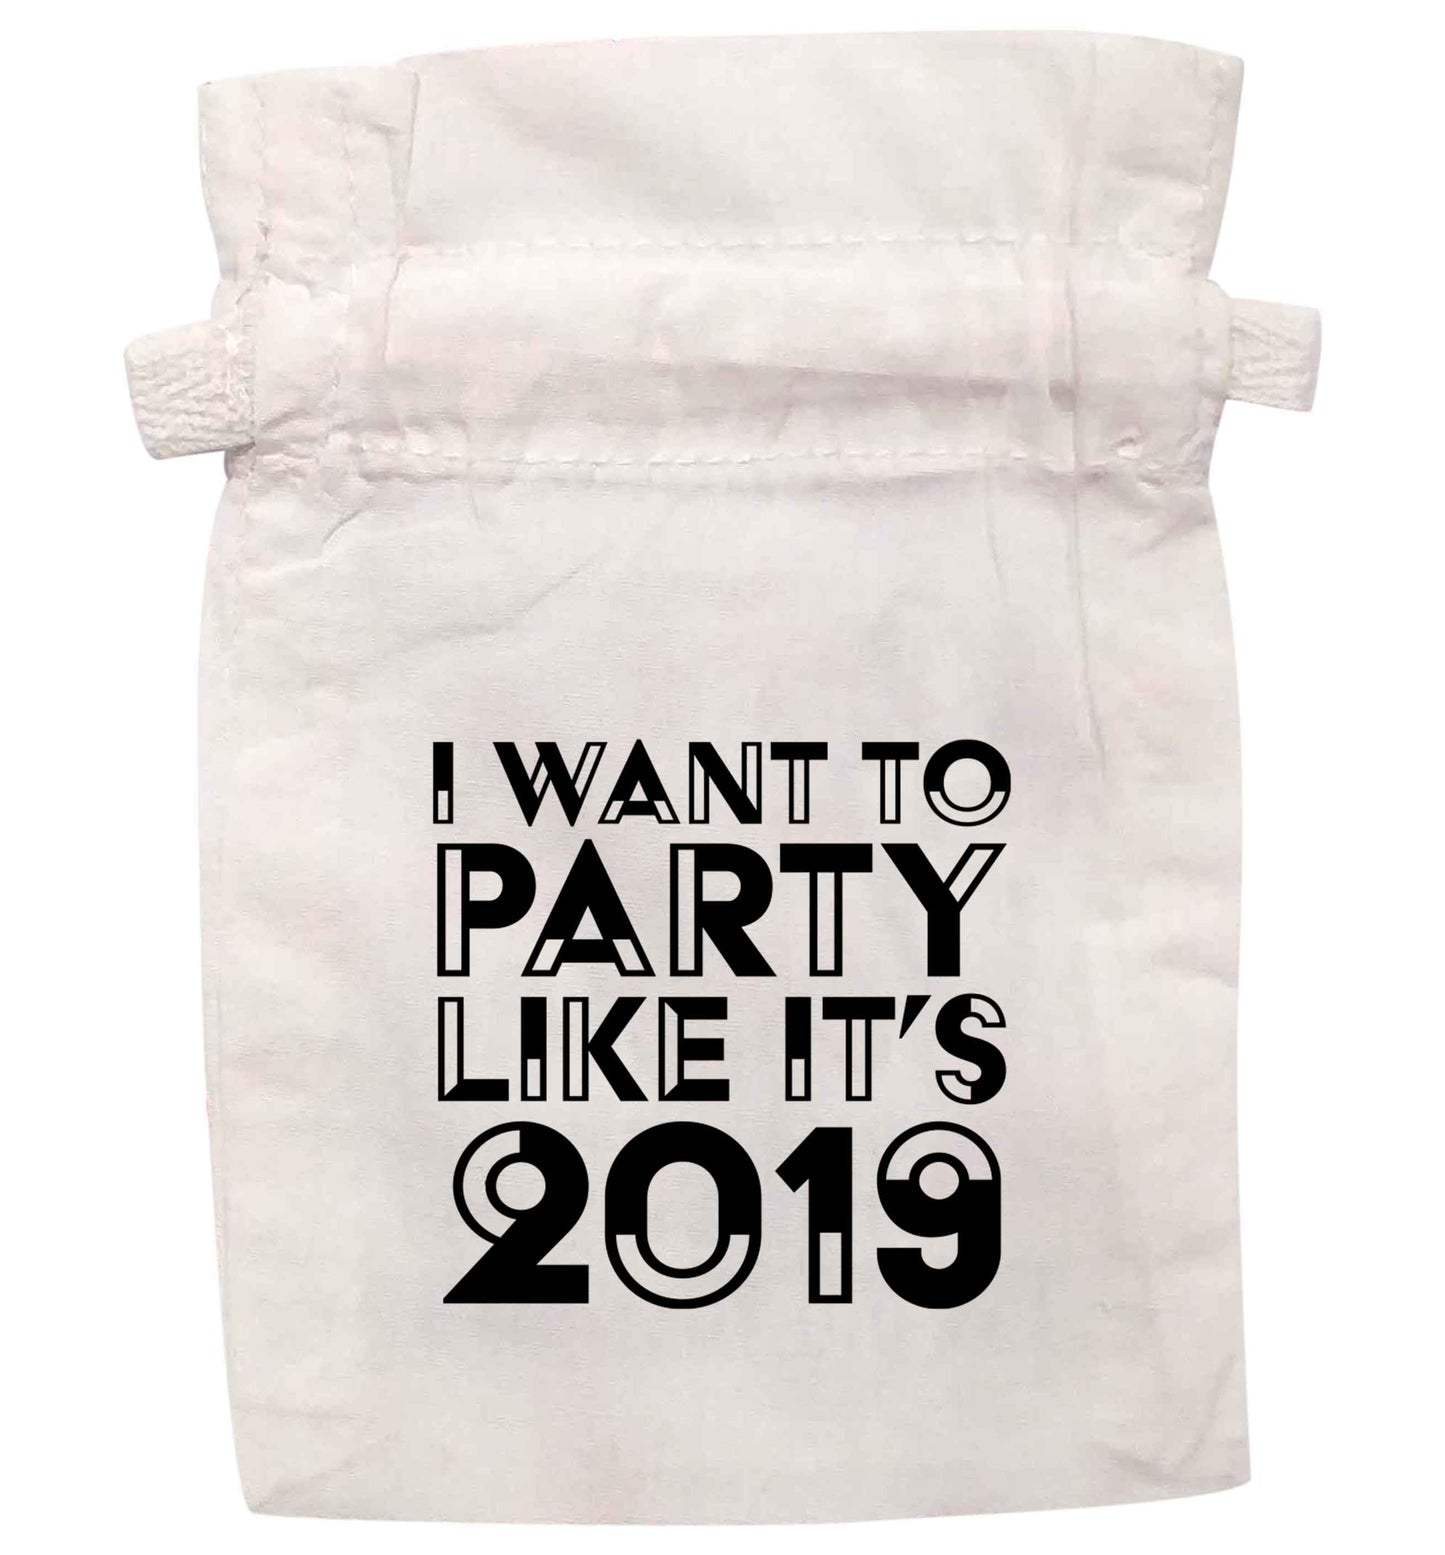 I want to party like it's 2019 | XS - L | Pouch / Drawstring bag / Sack | Organic Cotton | Bulk discounts available!